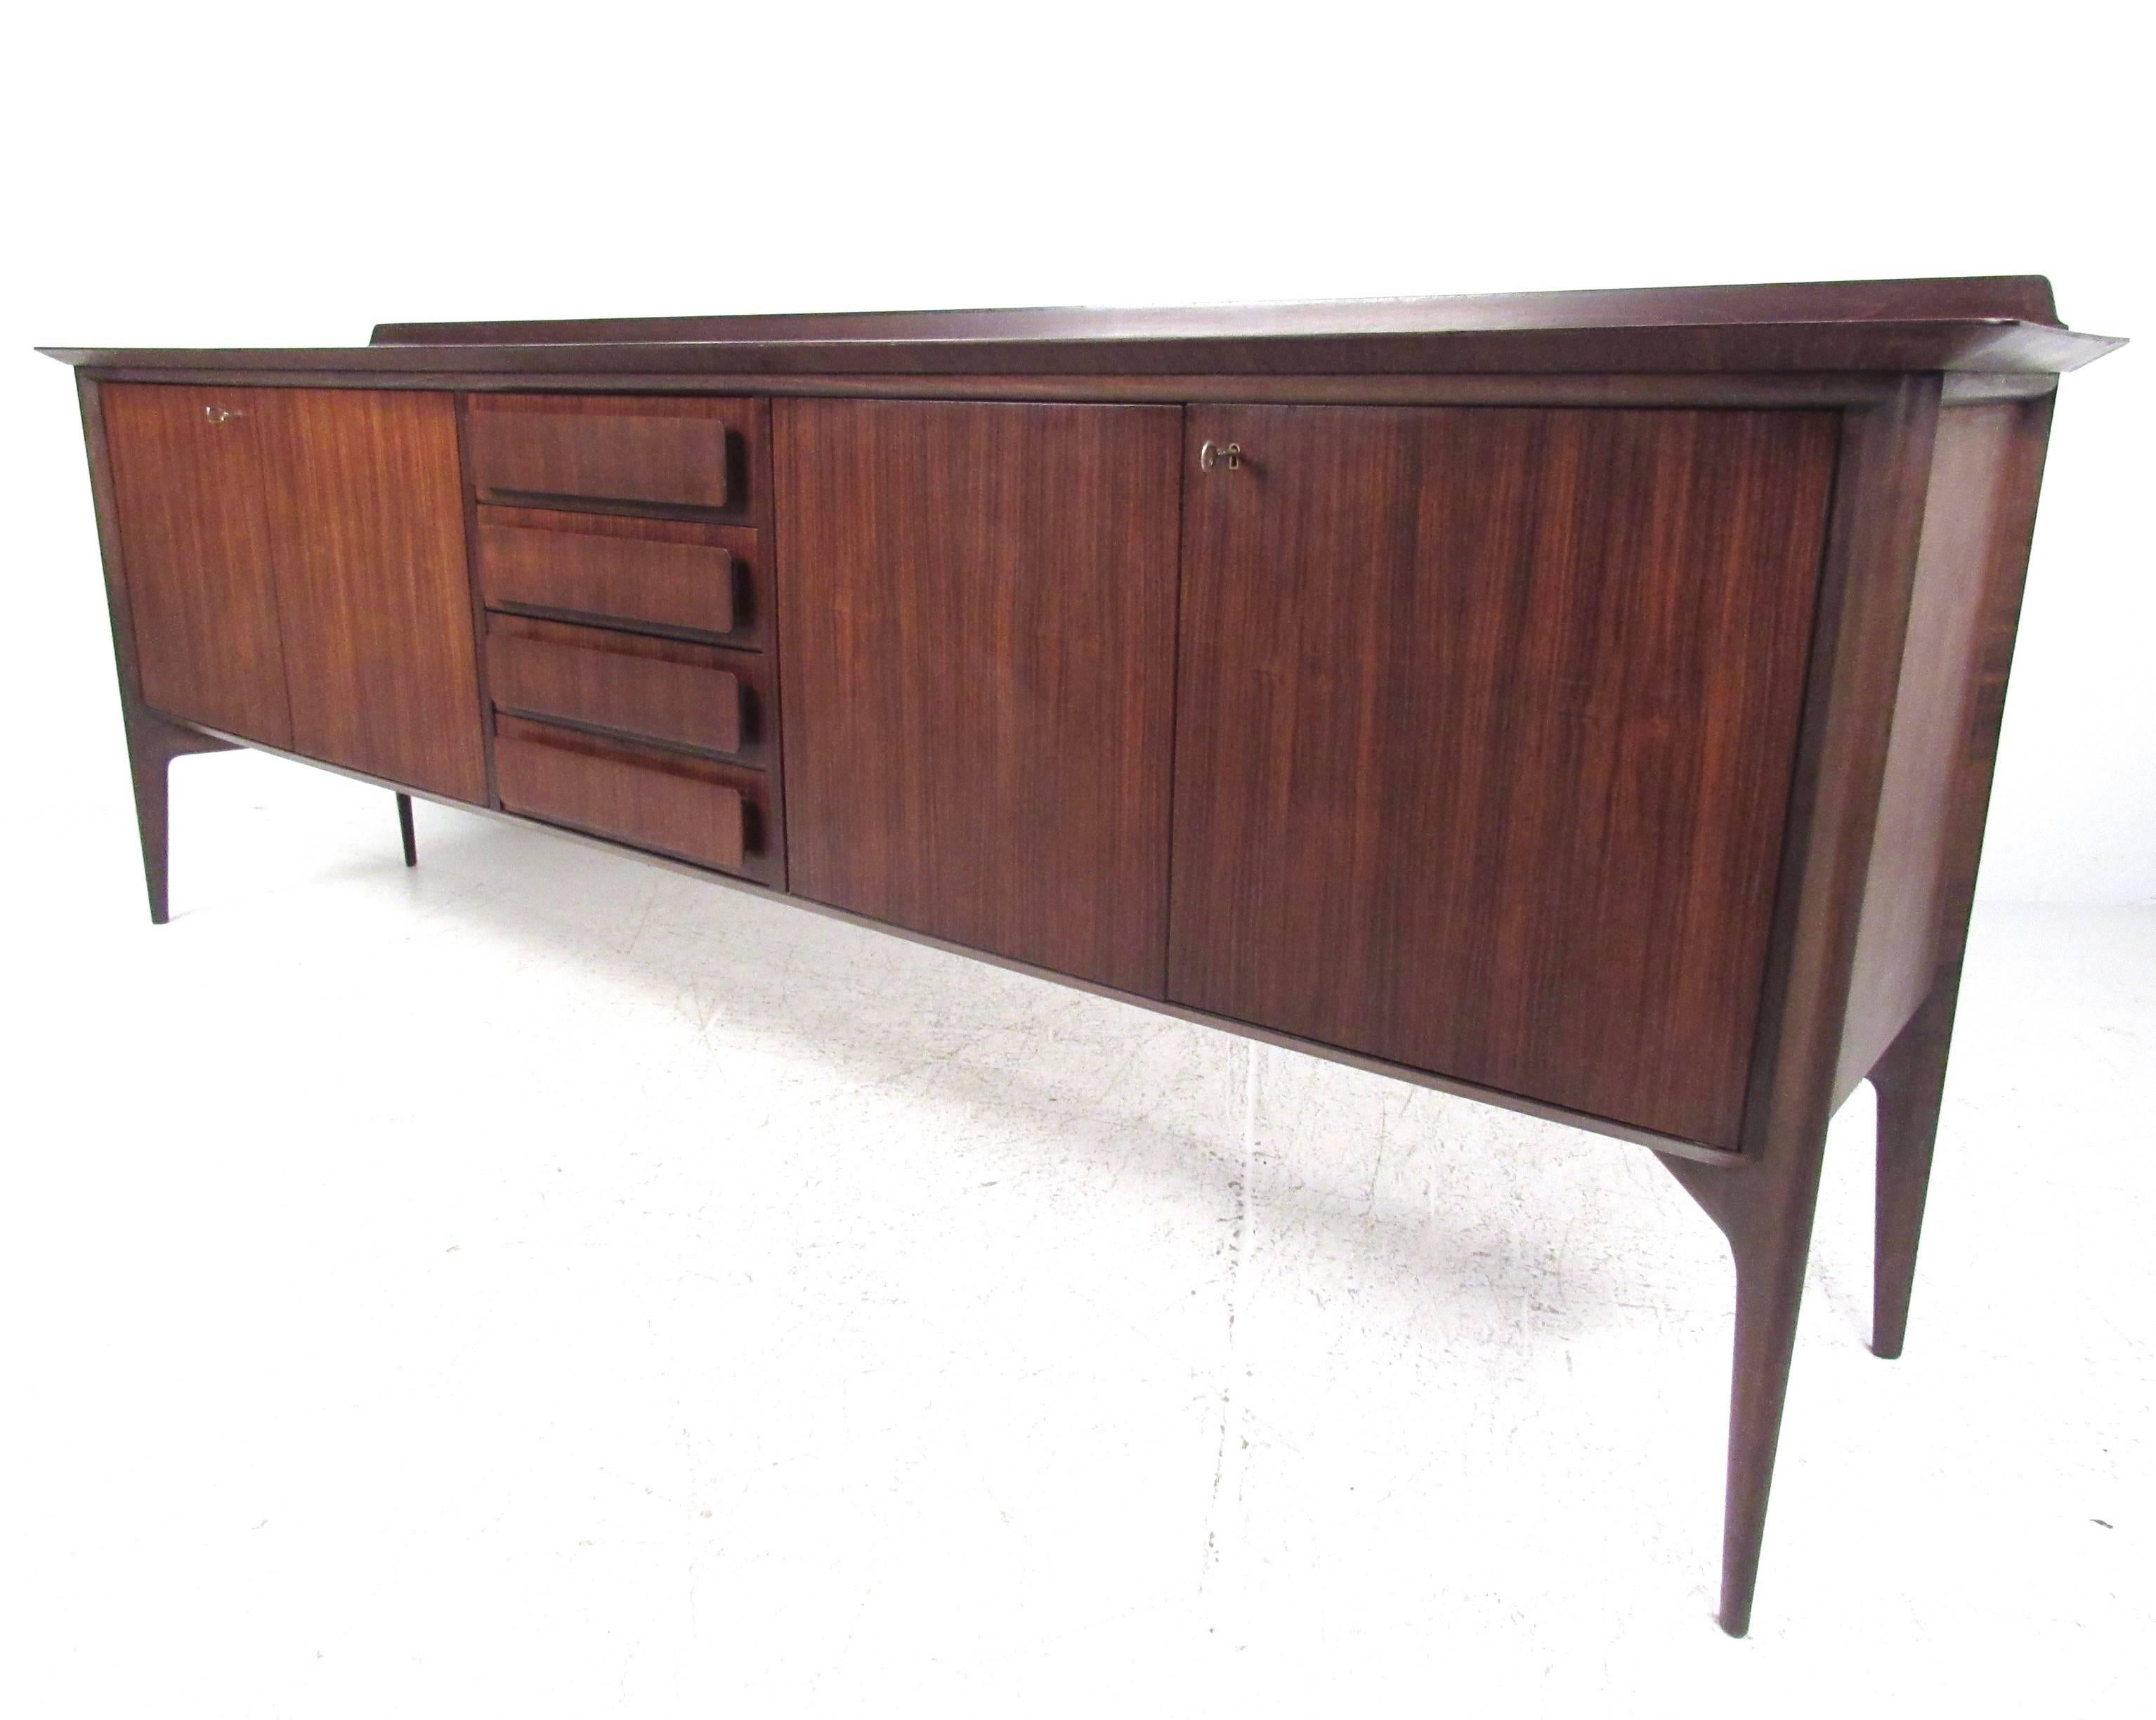 This stunning vintage mahogany sideboard features a dark wood finish with spacious locking cabinets. Raised rear edge, tapered legs, and unique carved front center drawers add to the Mid-Century appeal of the piece. The oversized design of this